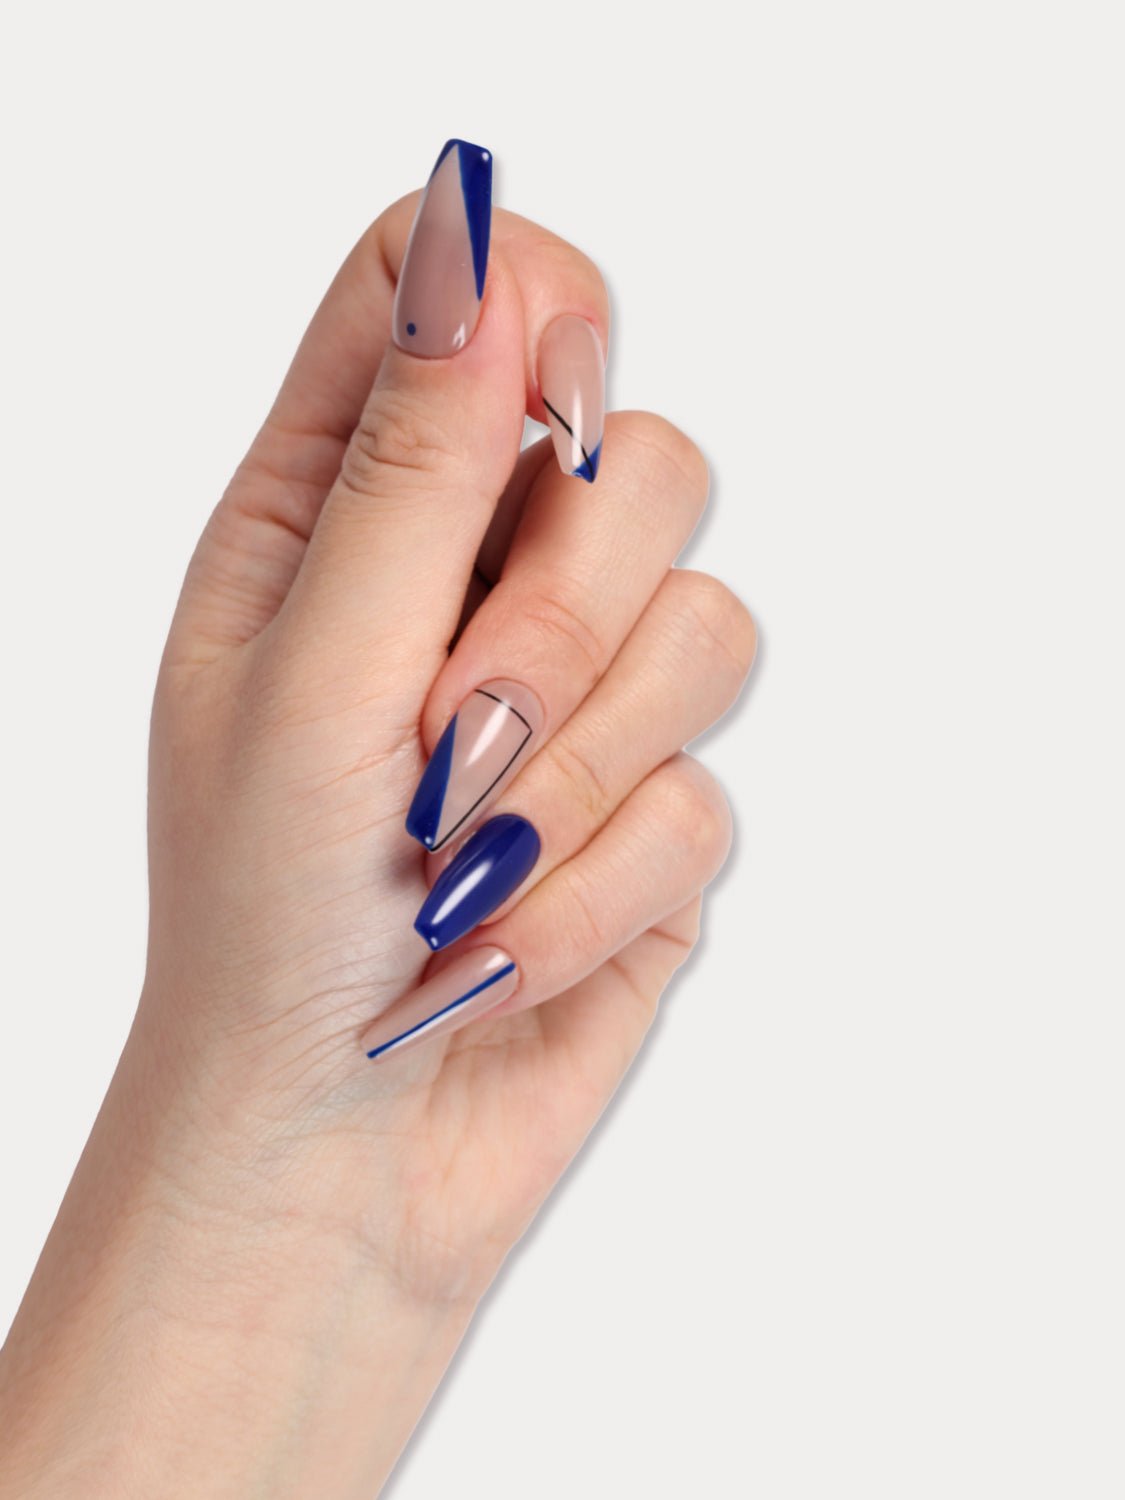 Spring 2014 Nail Trend - Cobalt Blue Nail Polish : All Lacquered Up